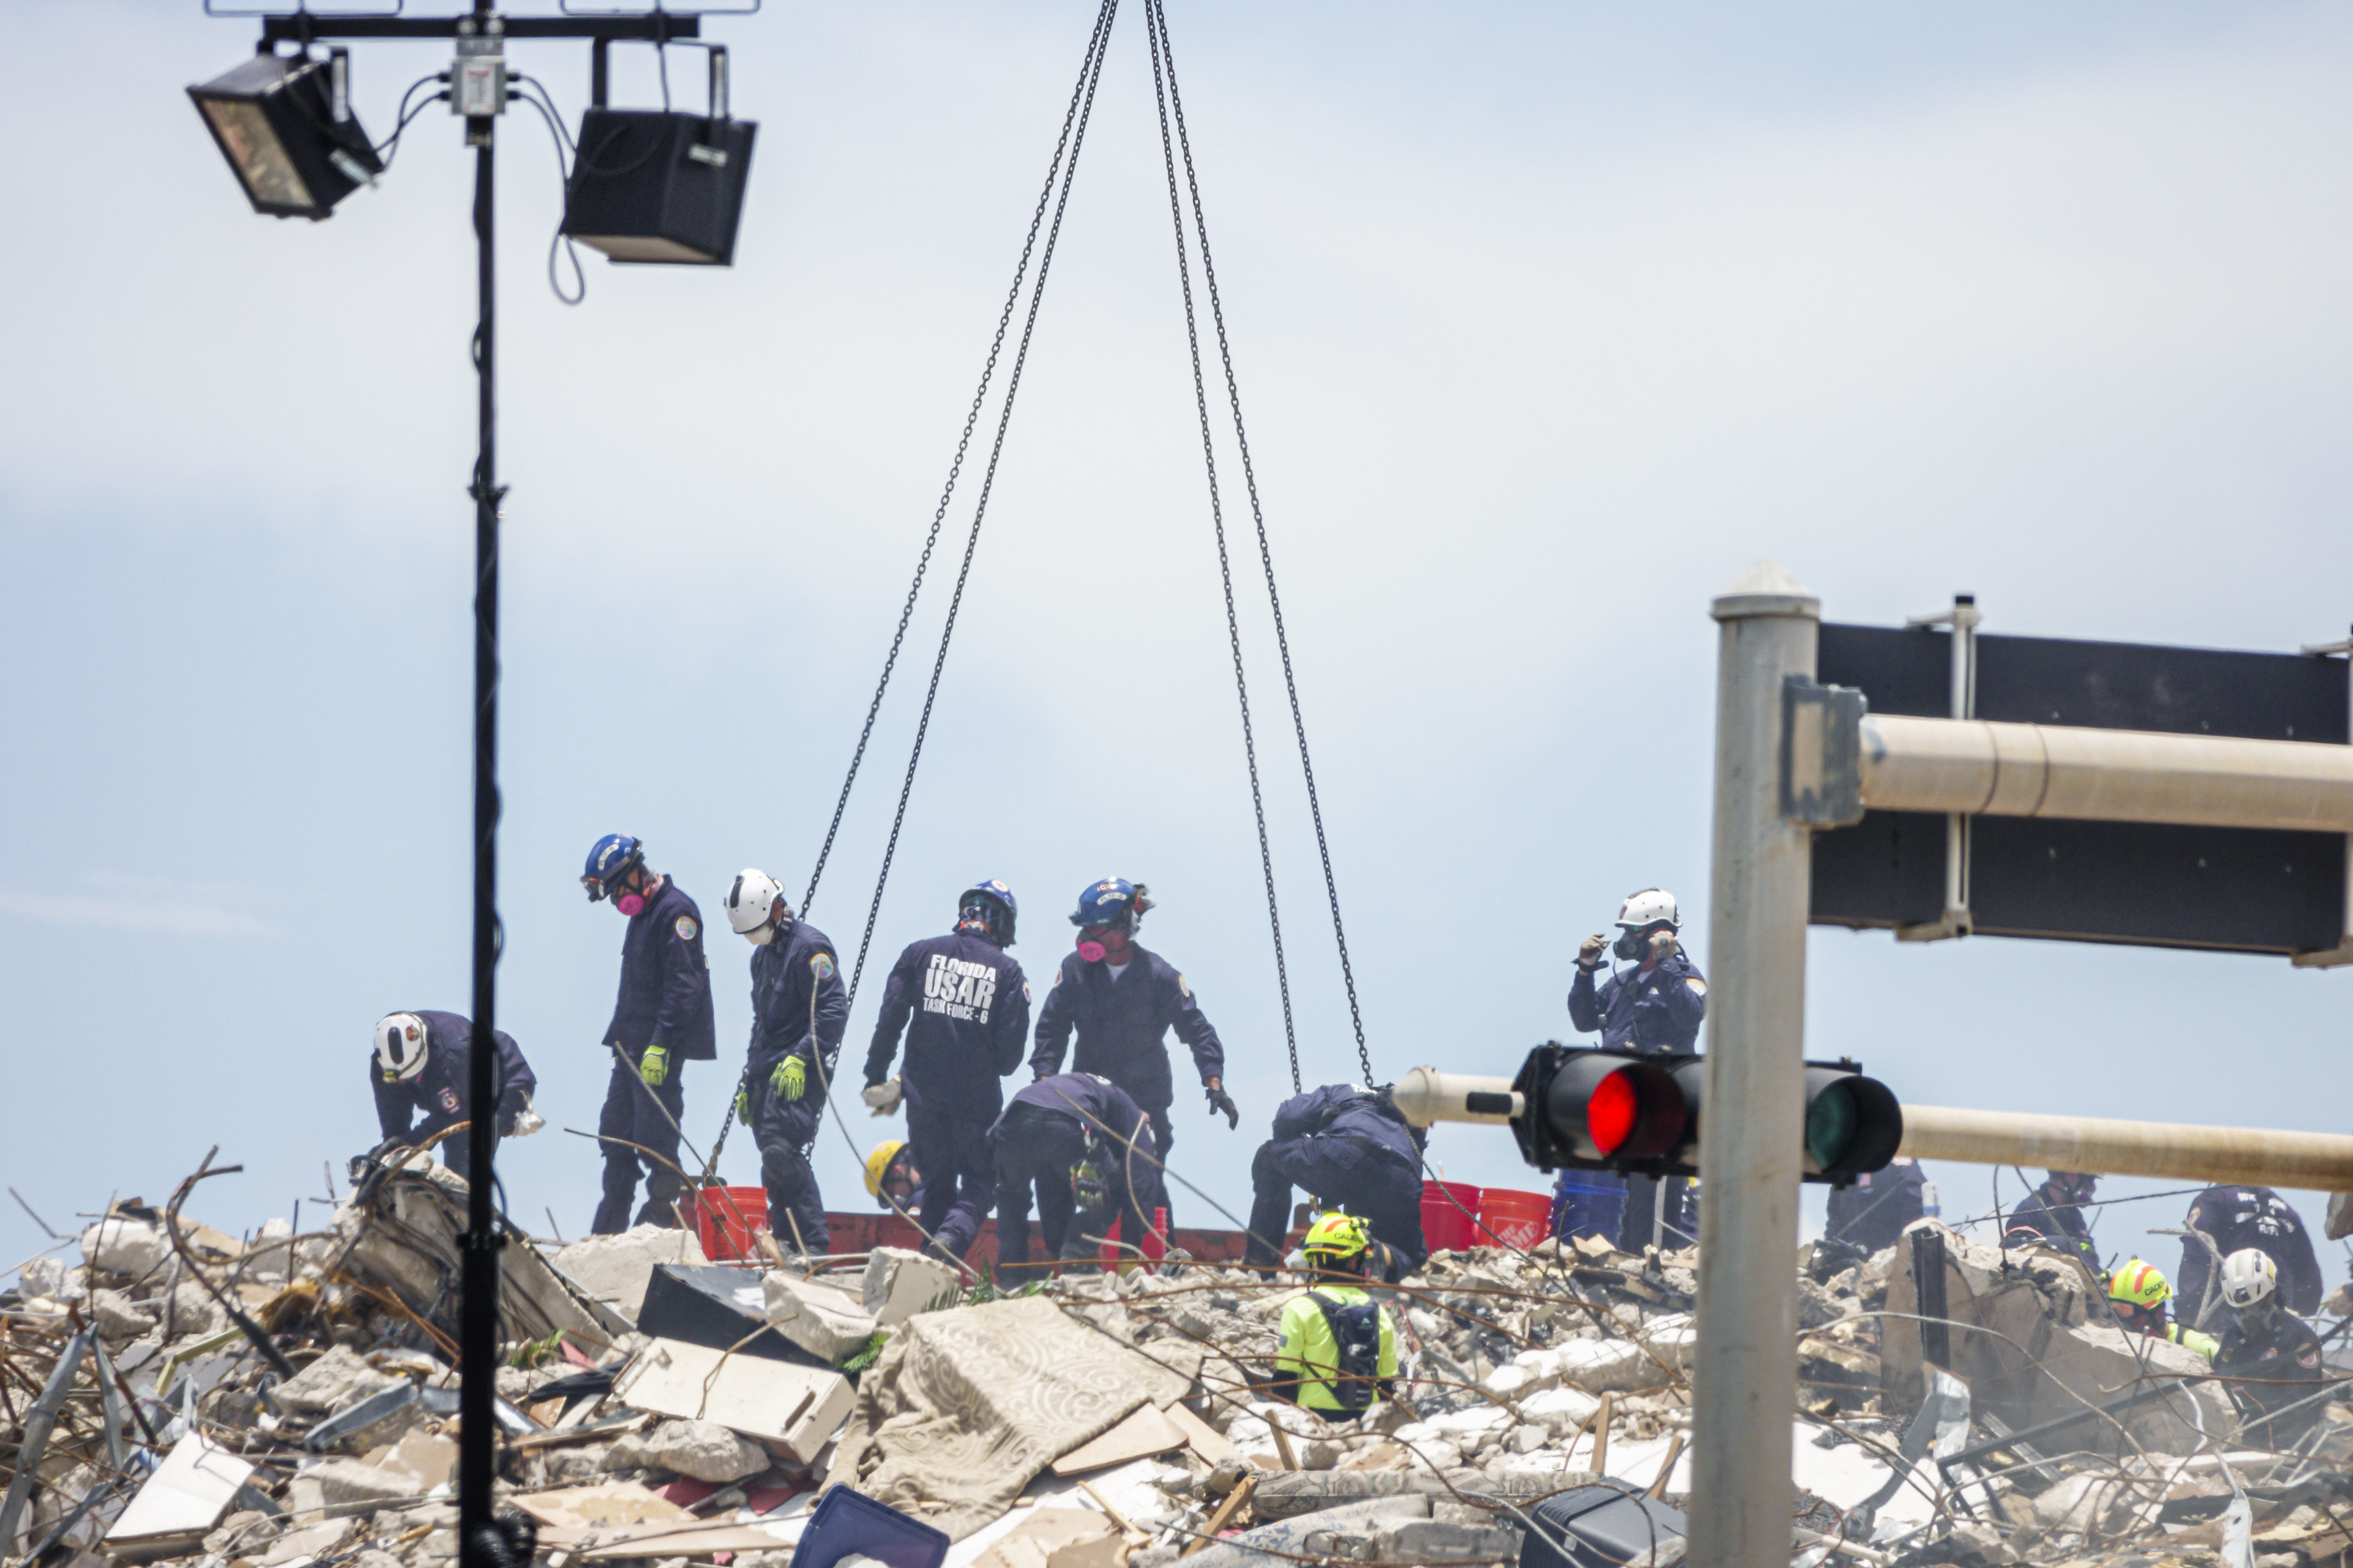 Judge gives initial OK to B deal in Surfside condo collapse